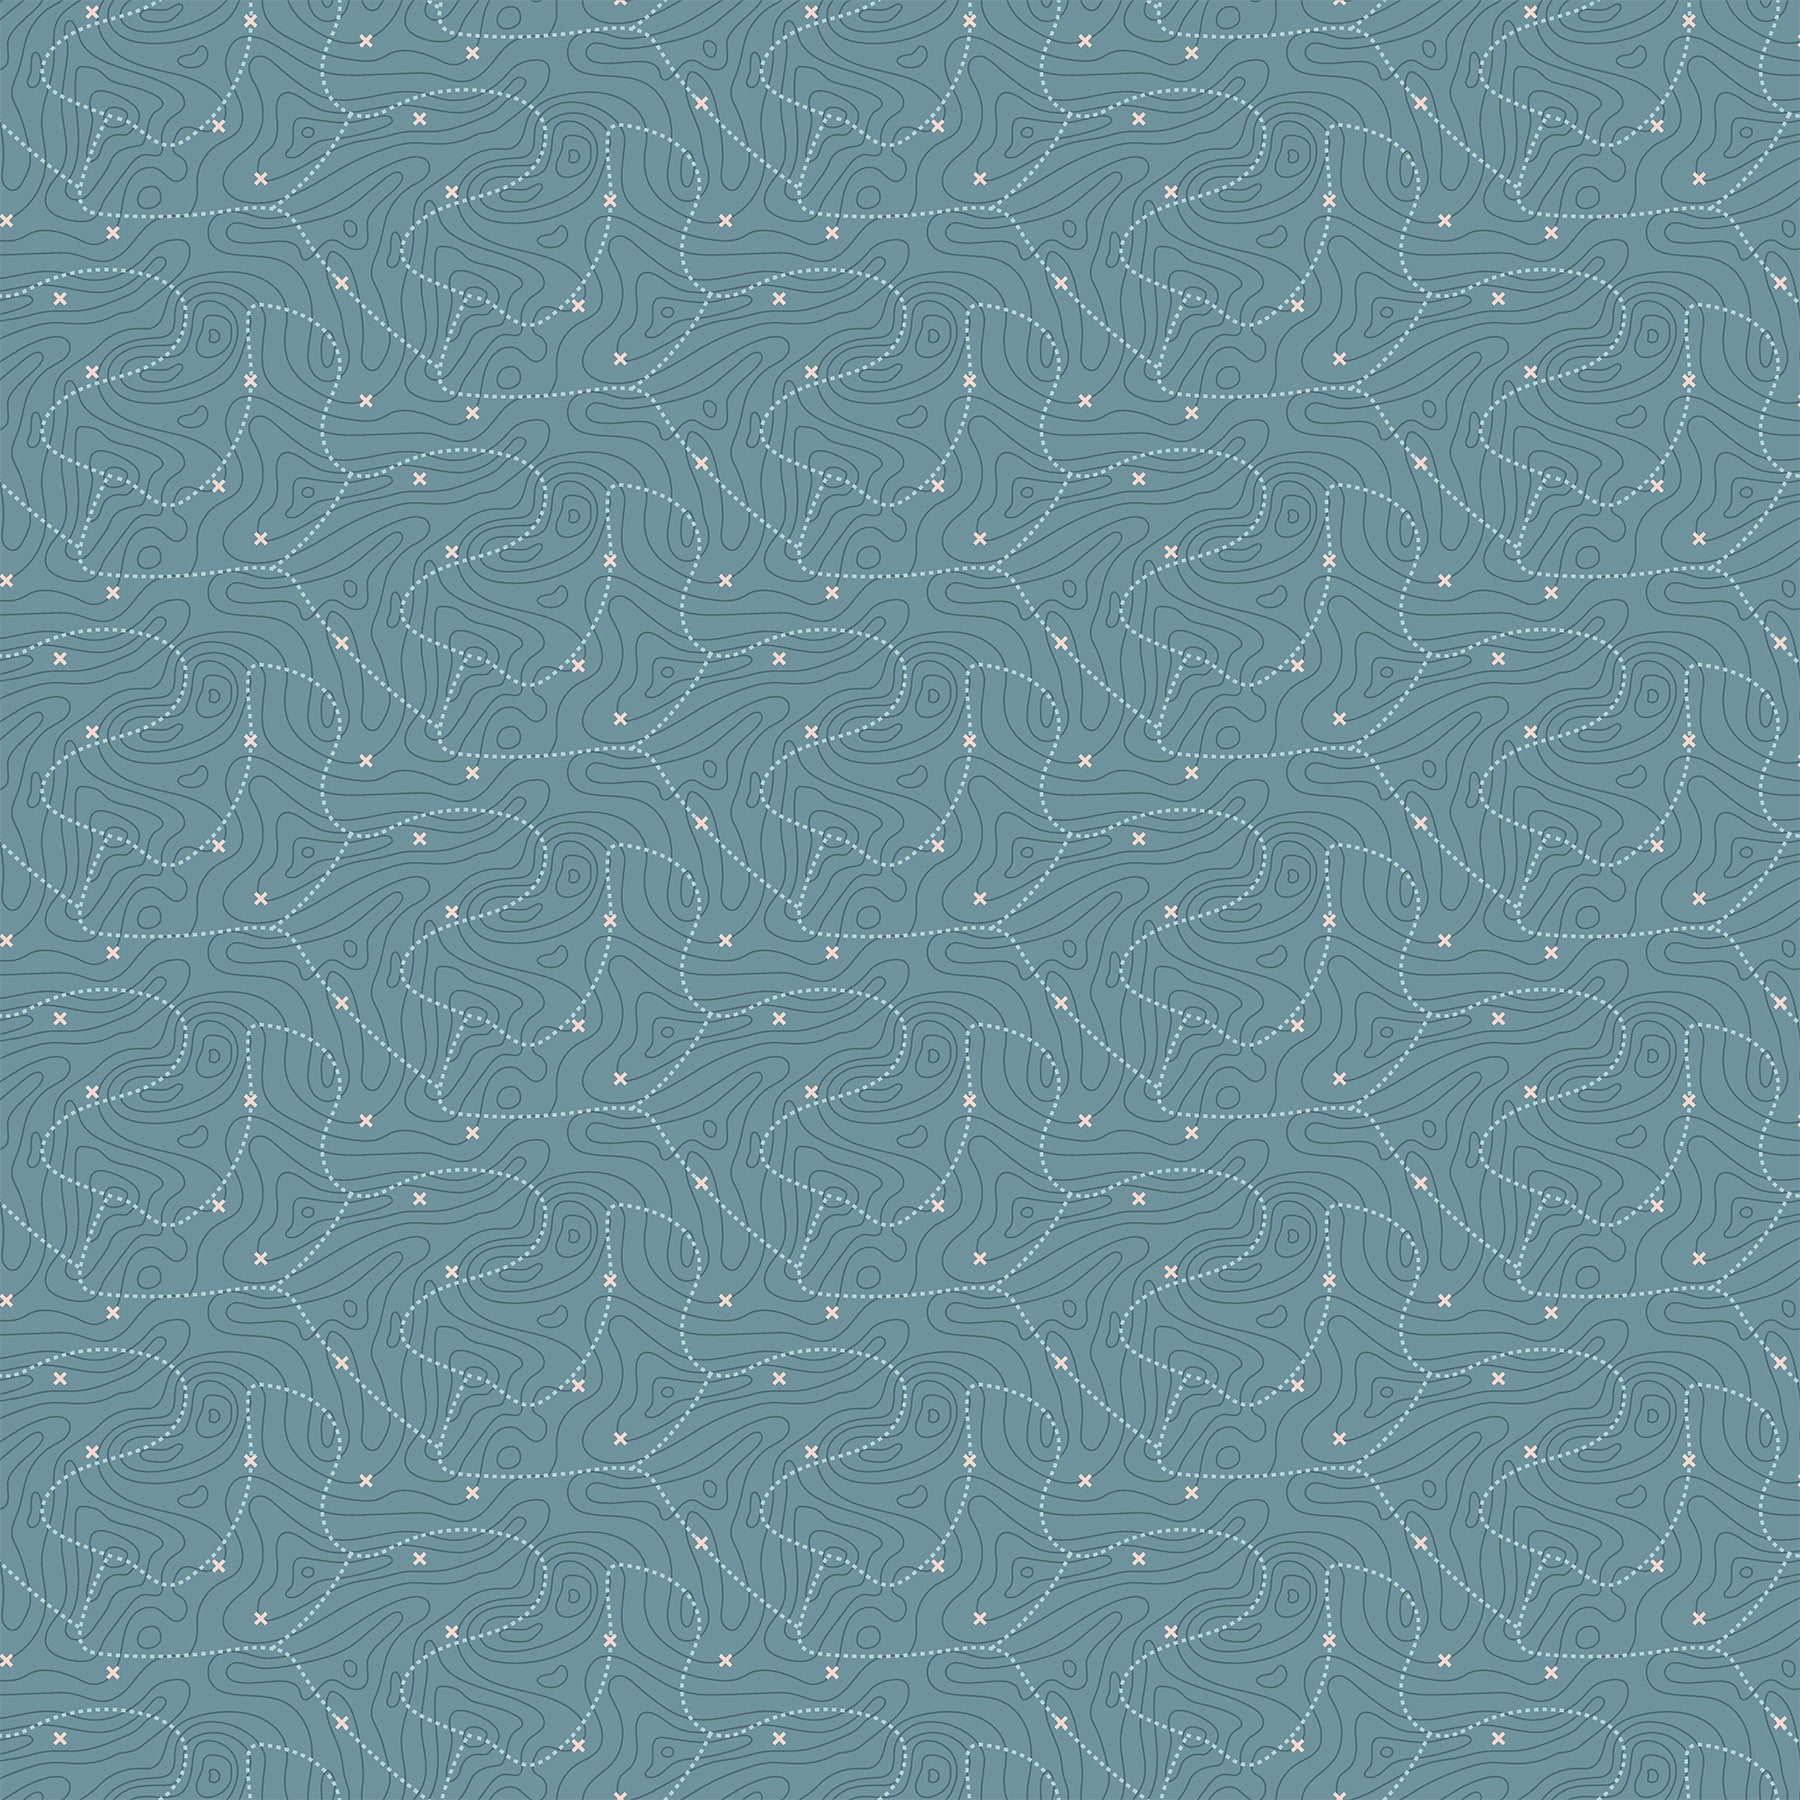 Around the Campfire - Topography Teal Fabric